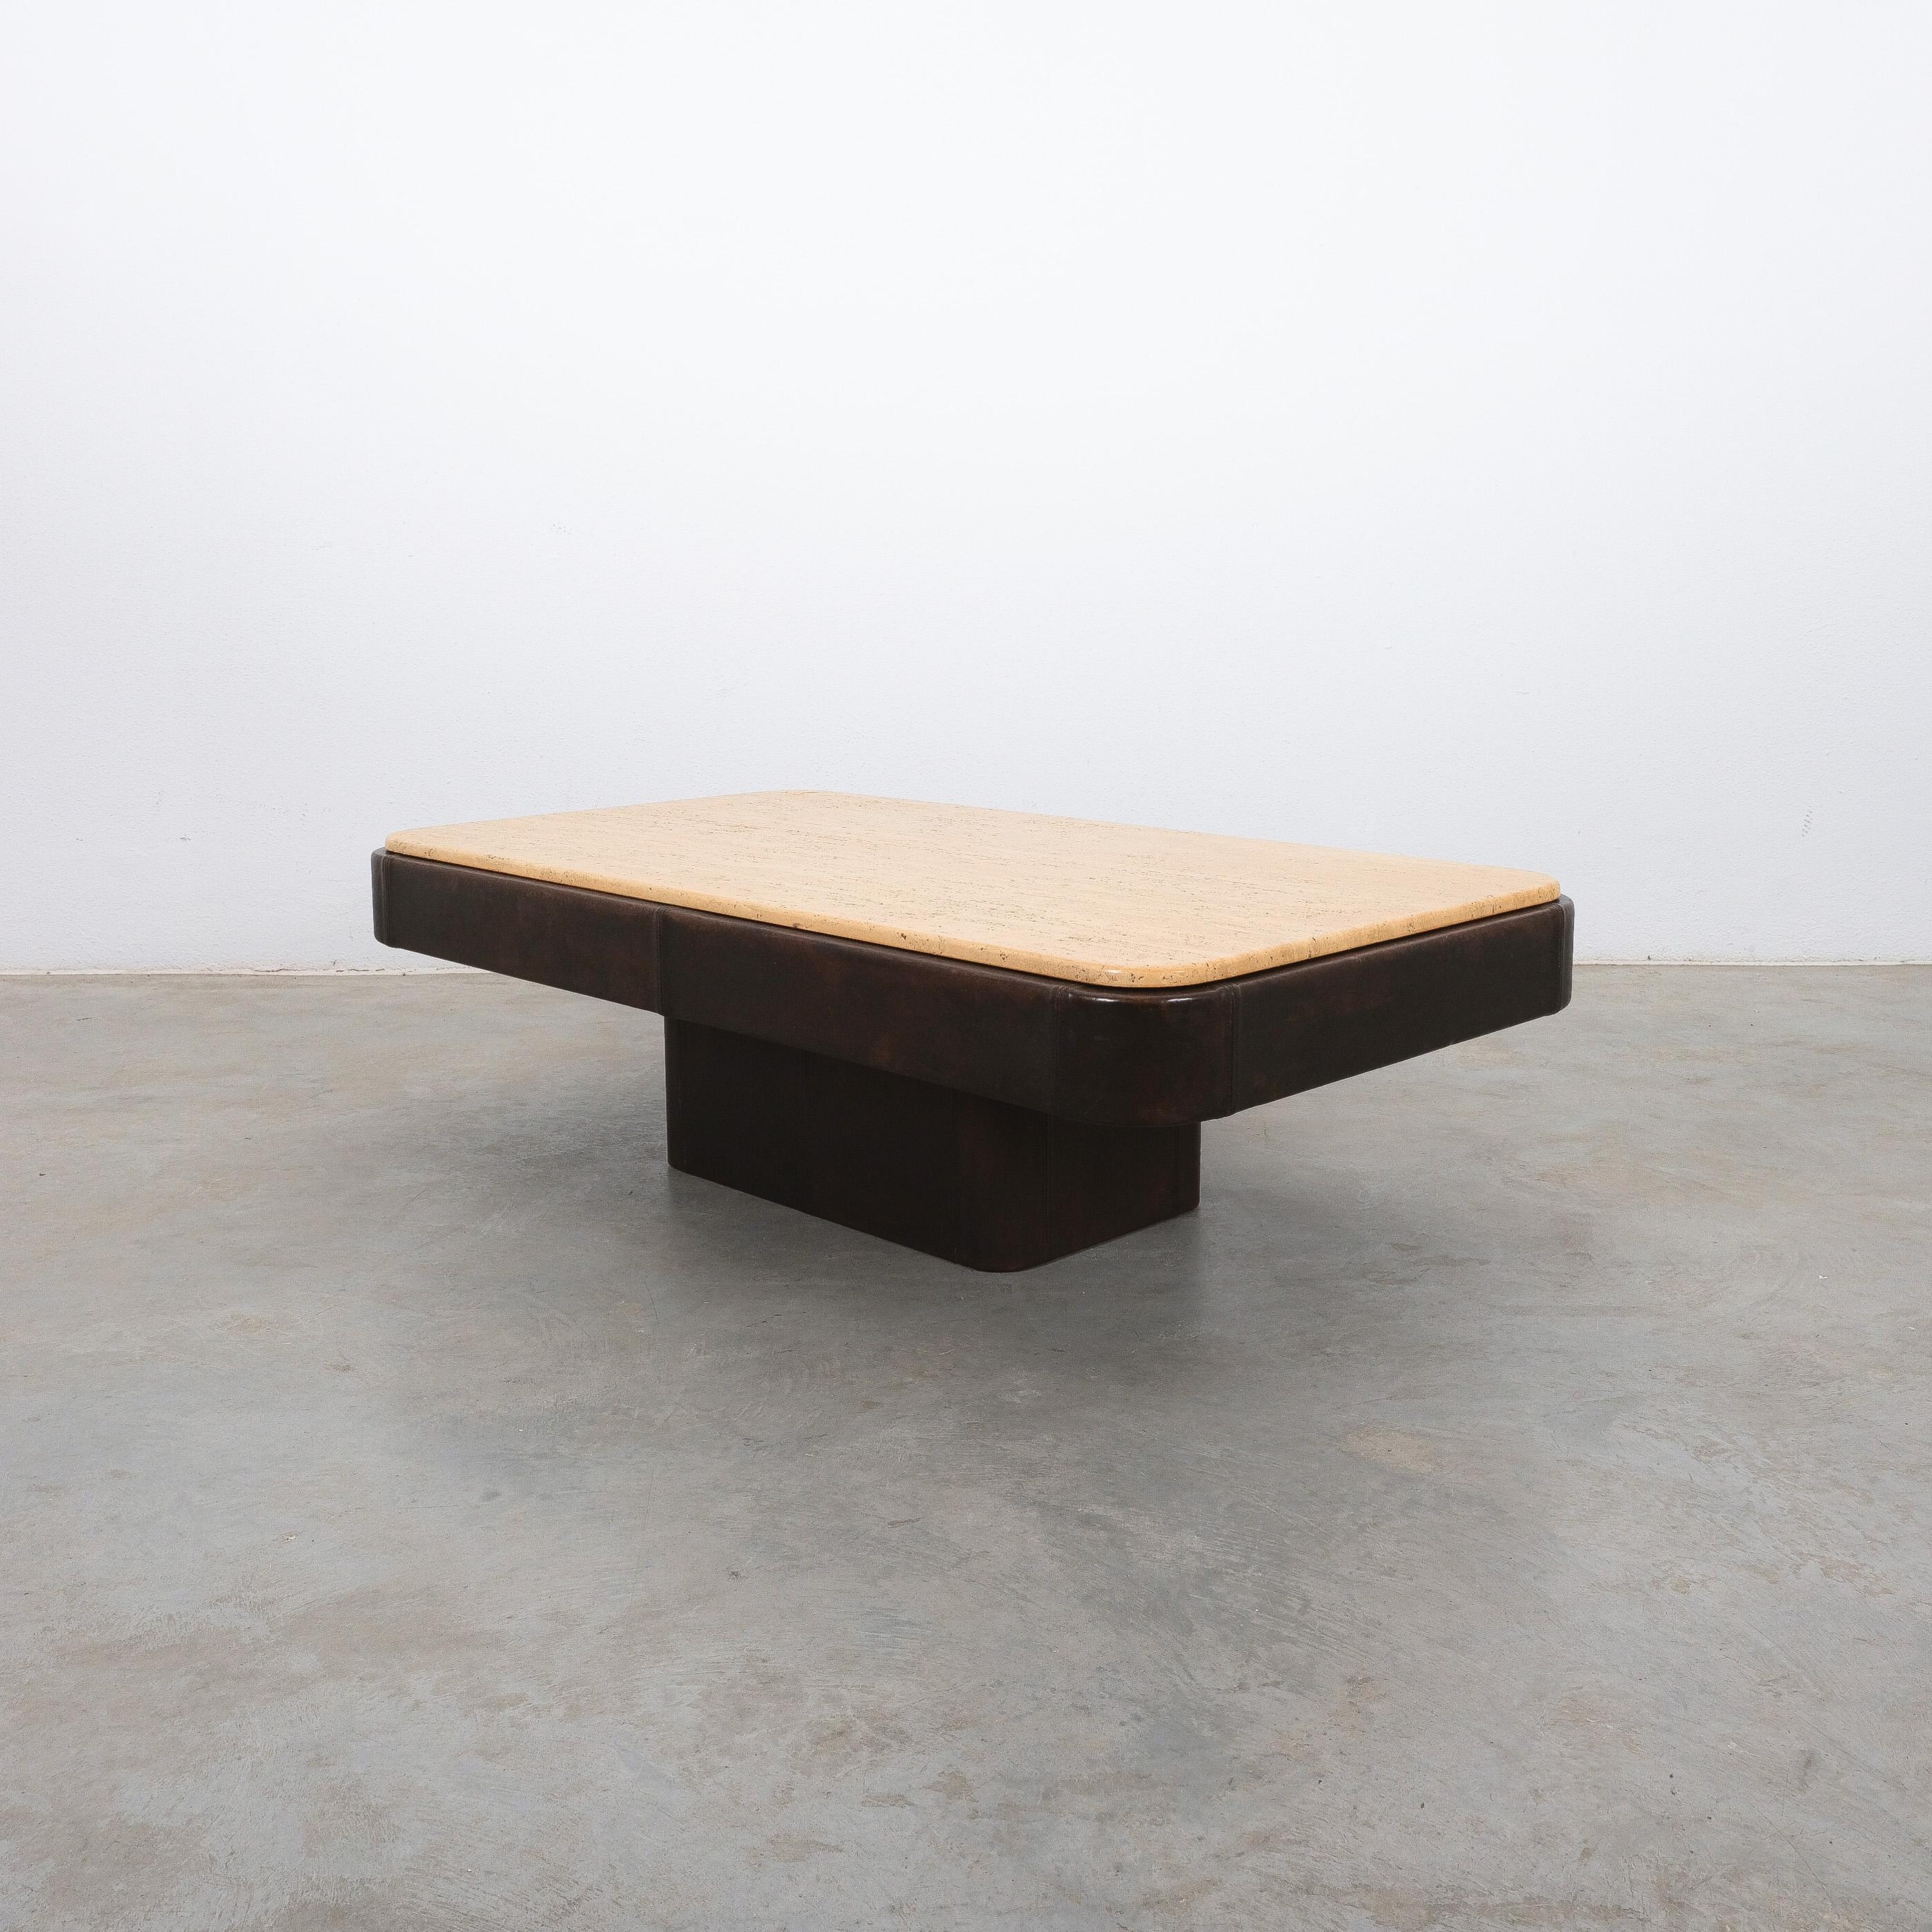 Late 20th Century De Sede Table DS 47 Table Leather Travertine Stone, Circa 1970 For Sale